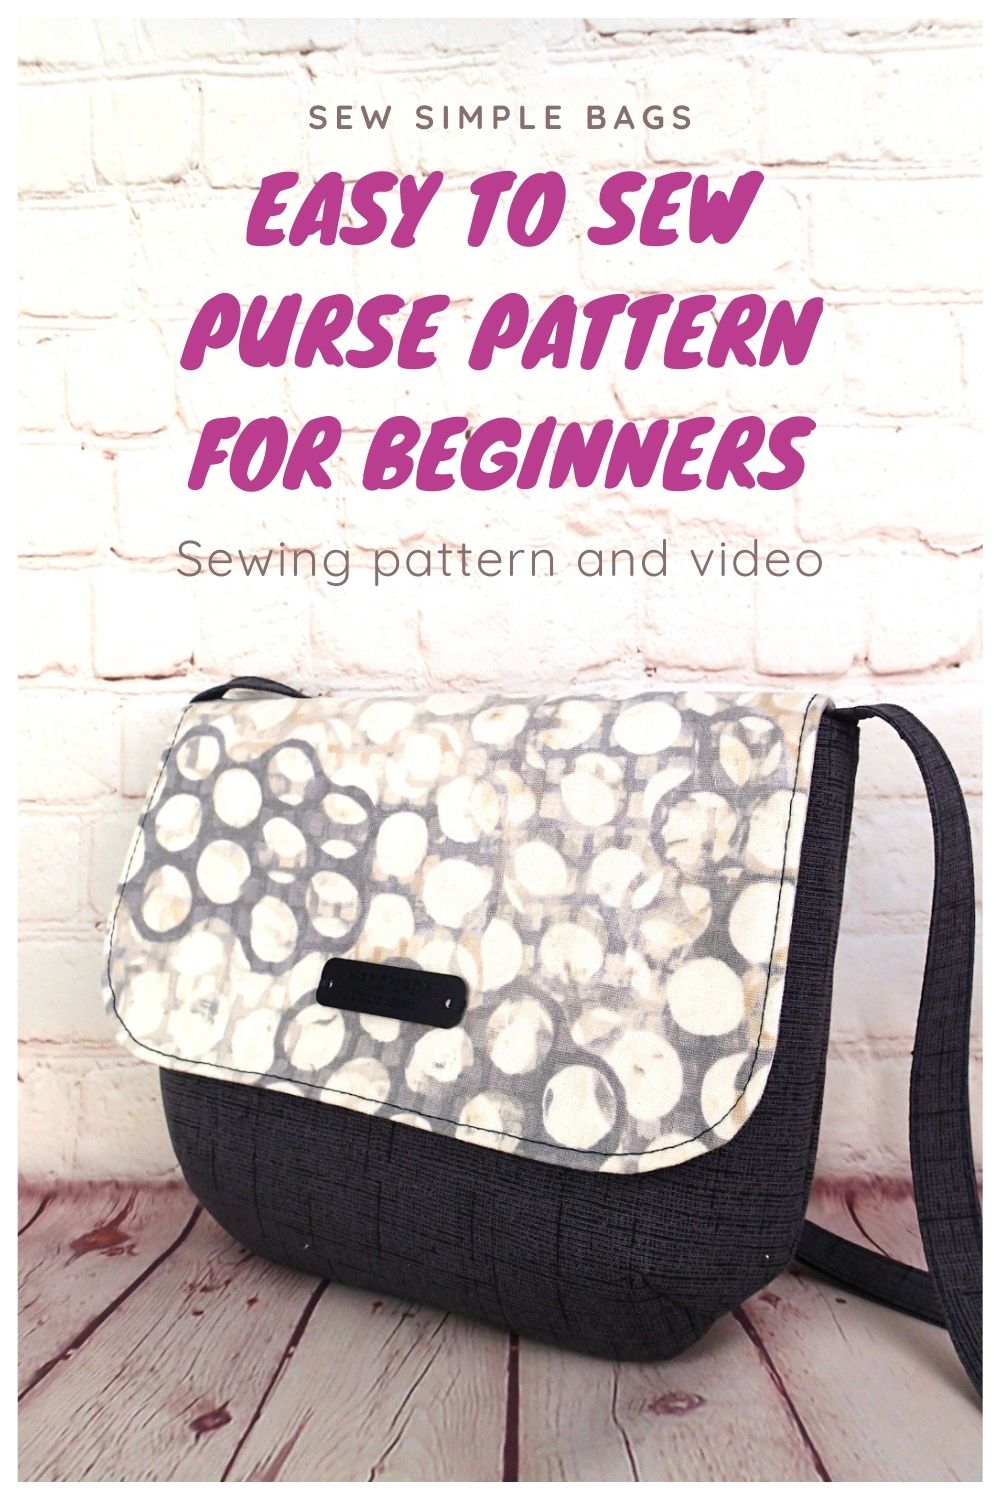 Monica Poole's Top 10 Bag Making Tips! - Cosy Blog